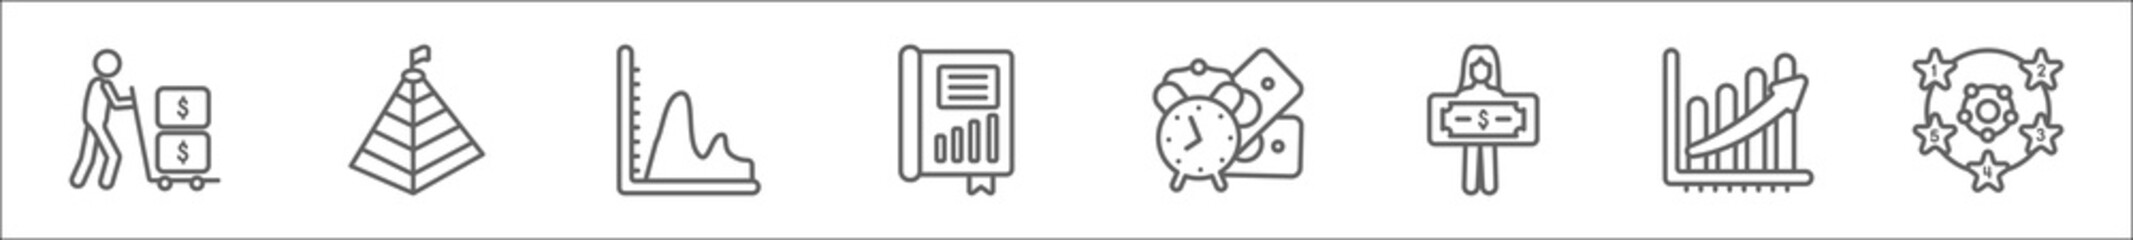 outline set of business line icons. linear vector icons such as man carrying money, stats pyramid, smooth line chart, story, dollar on business time, woman with dollar bill, finances stats bars